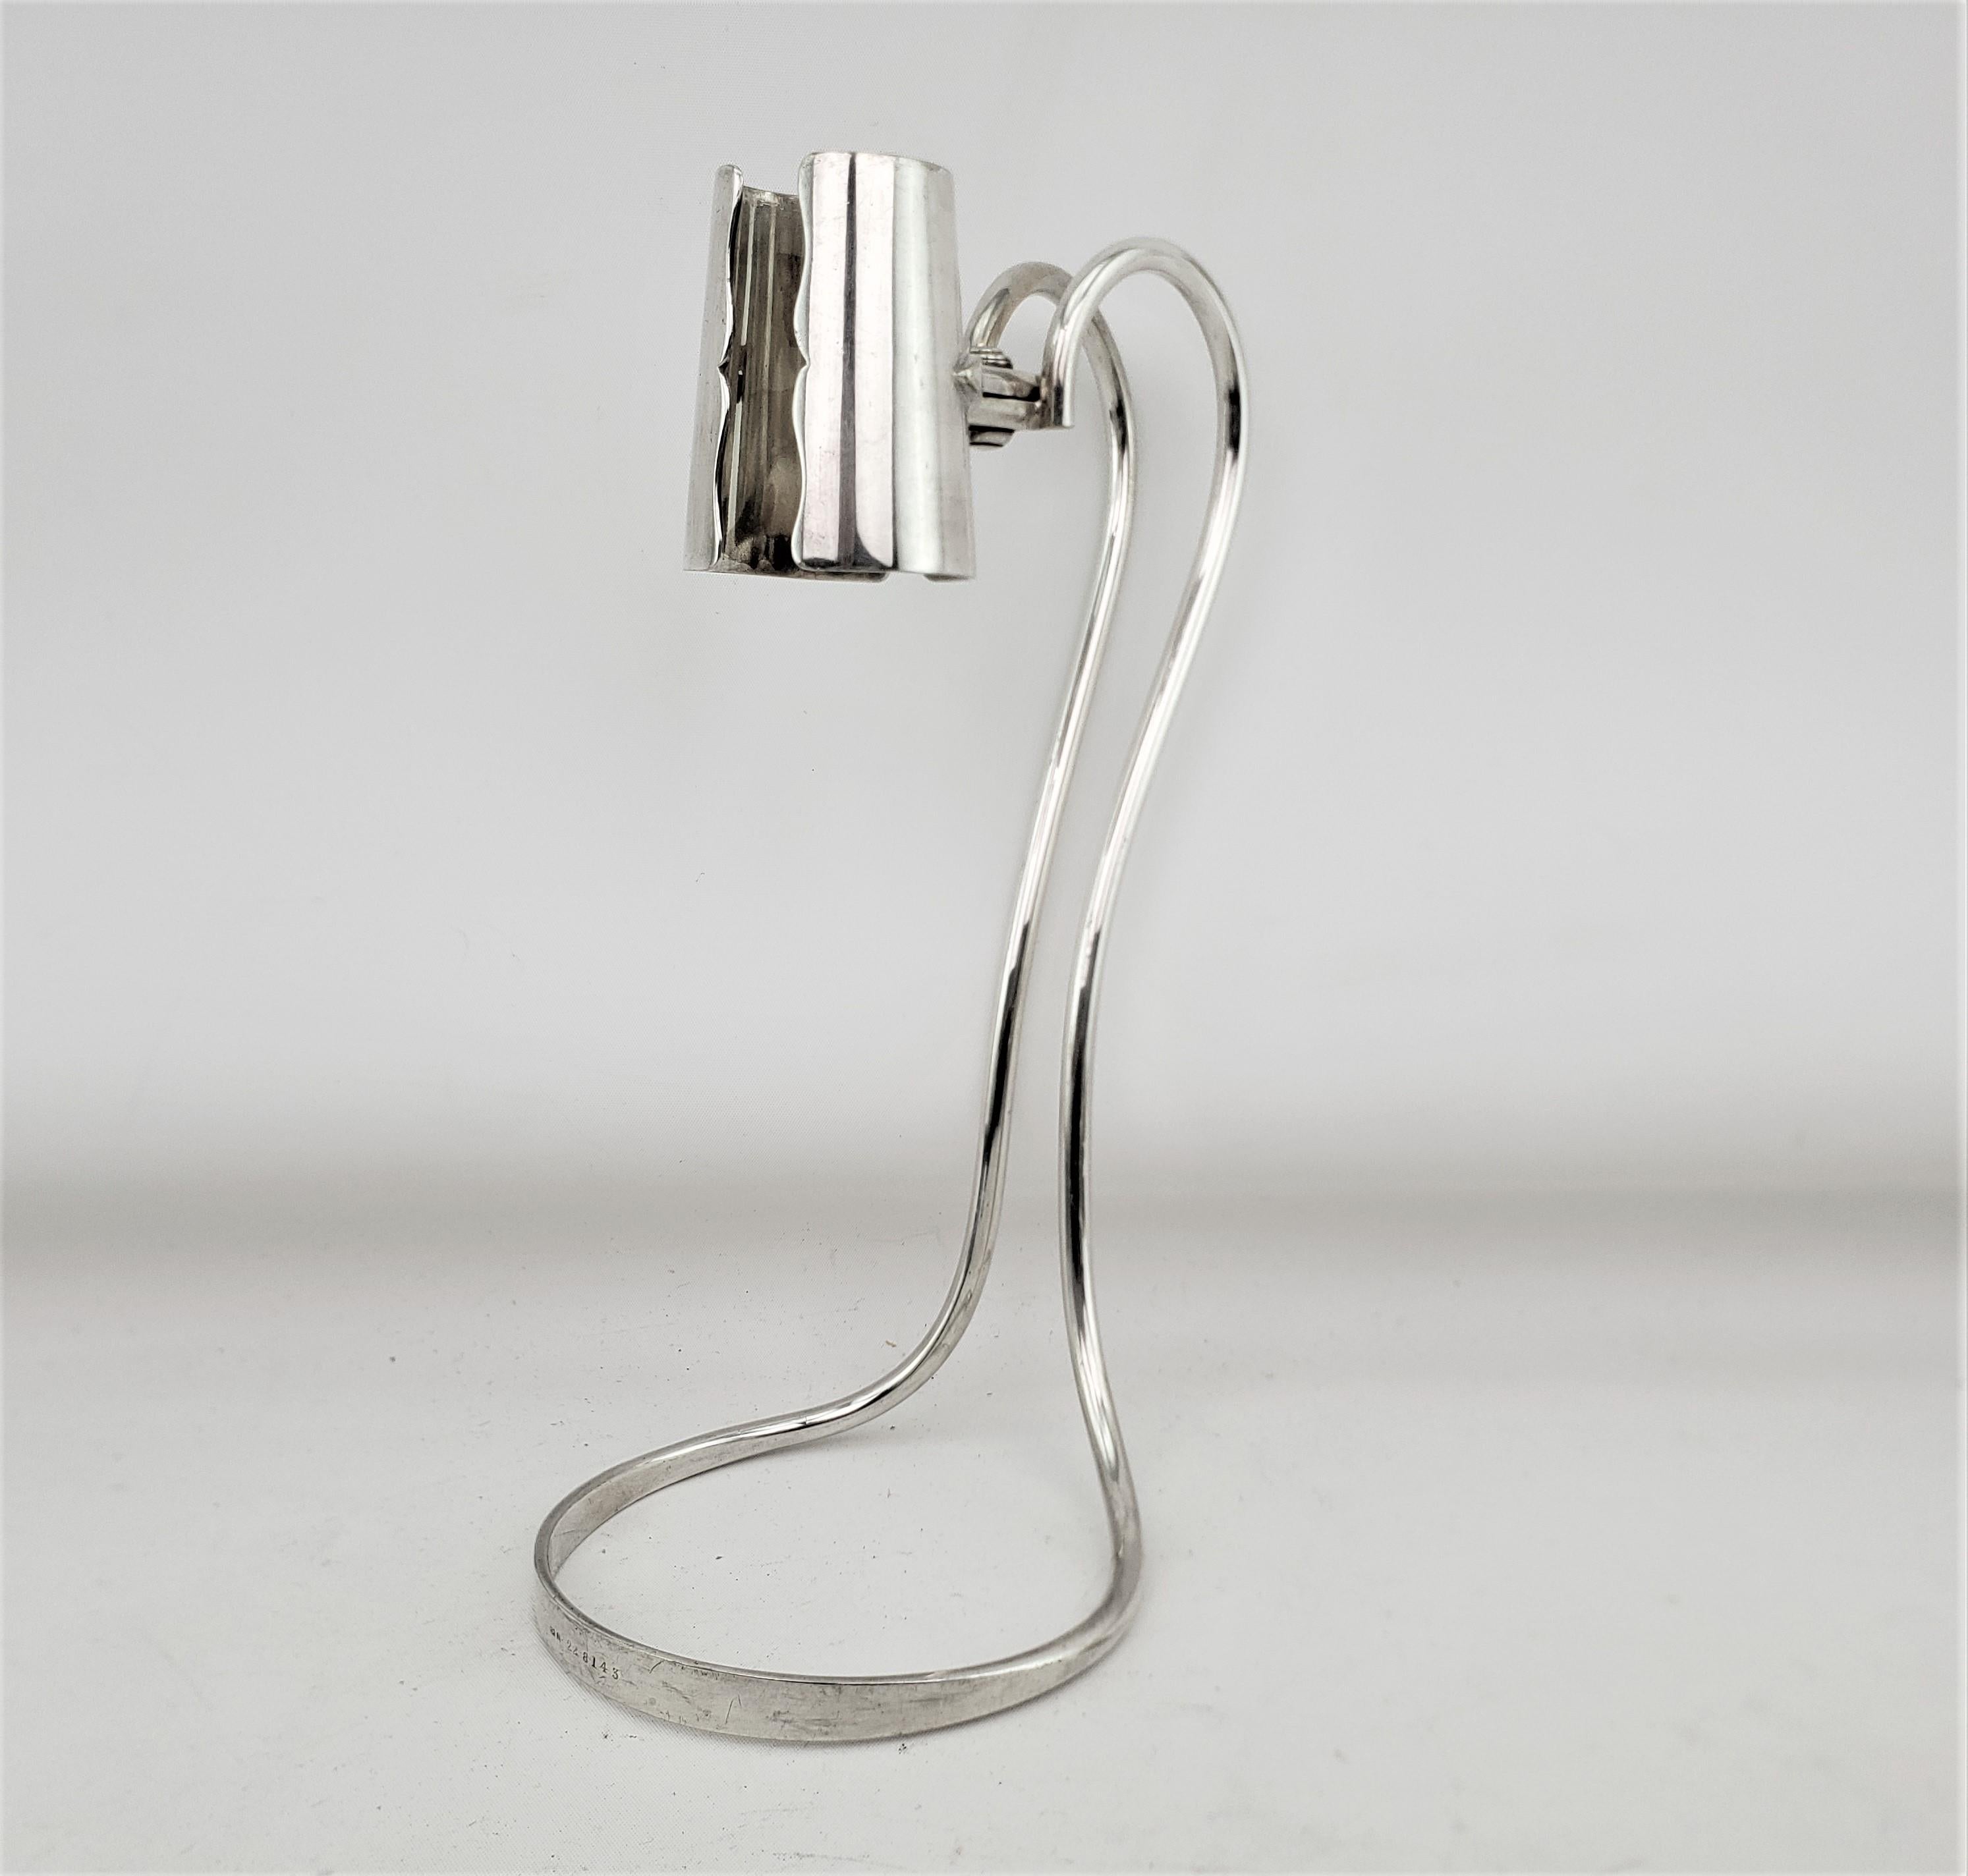 This antique bottle holder was made by the well known Hukin & Heath silversmiths of England and dates to approximately 1920 and done in the period Art Deco style. The well constructed bottle holder is composed of silver plate and is clearly